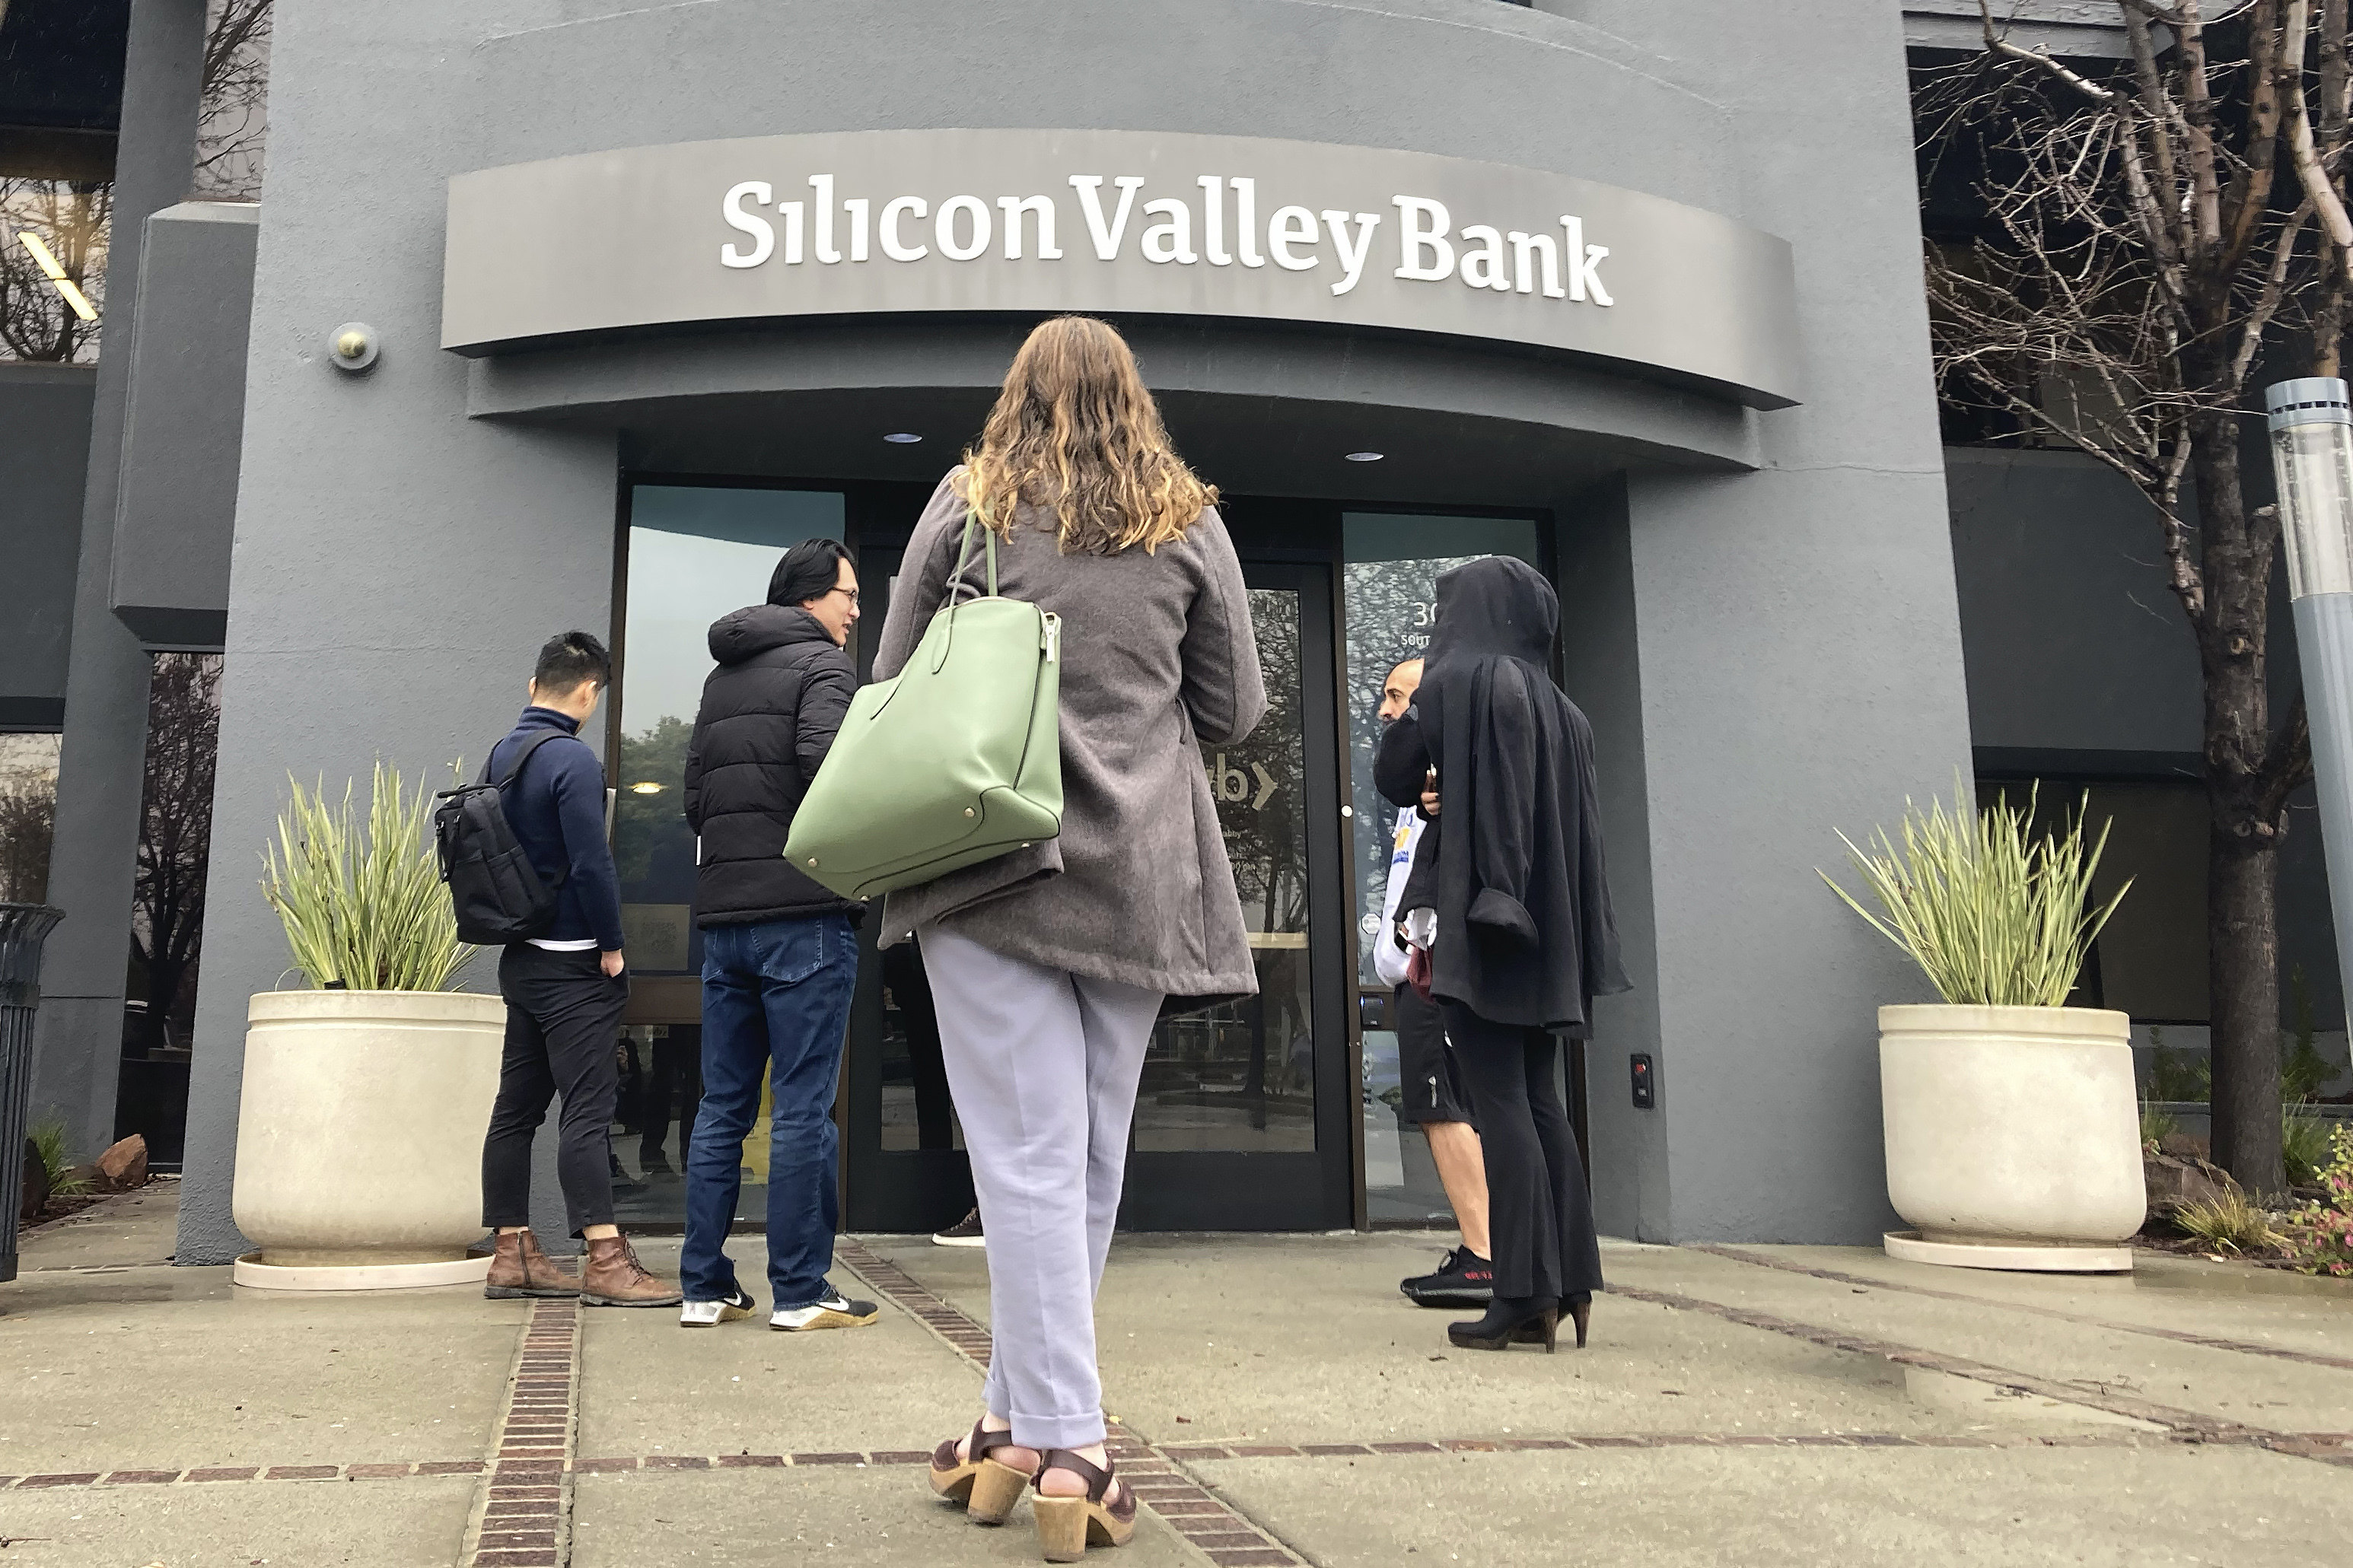 People stand outside an entrance to Silicon Valley Bank in Santa Clara, California, on March 10. The sustained rise in interest rates has helped drive the turmoil currently shaking markets, but a sudden shift to central banks cutting rates appears unlikely. Photo: AP